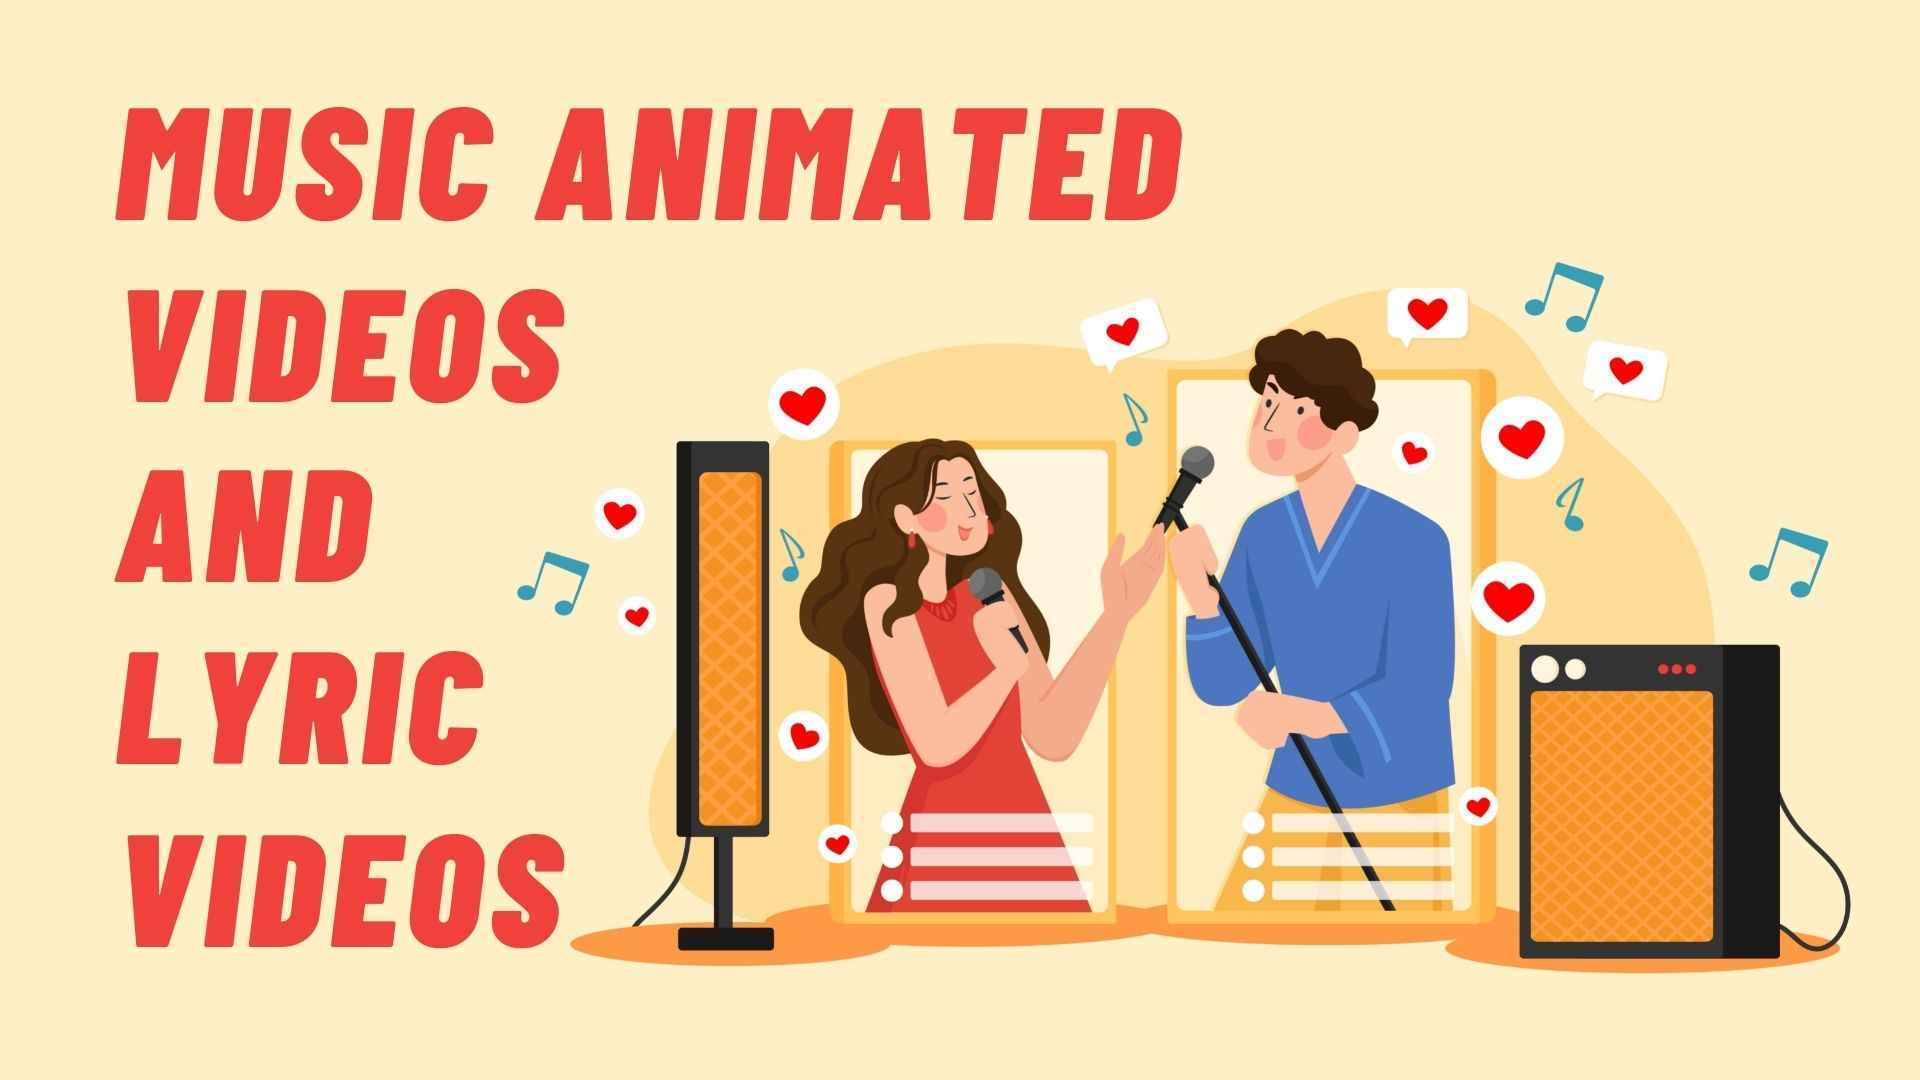 Music and lyric videos that are based on 2D and 3D animations